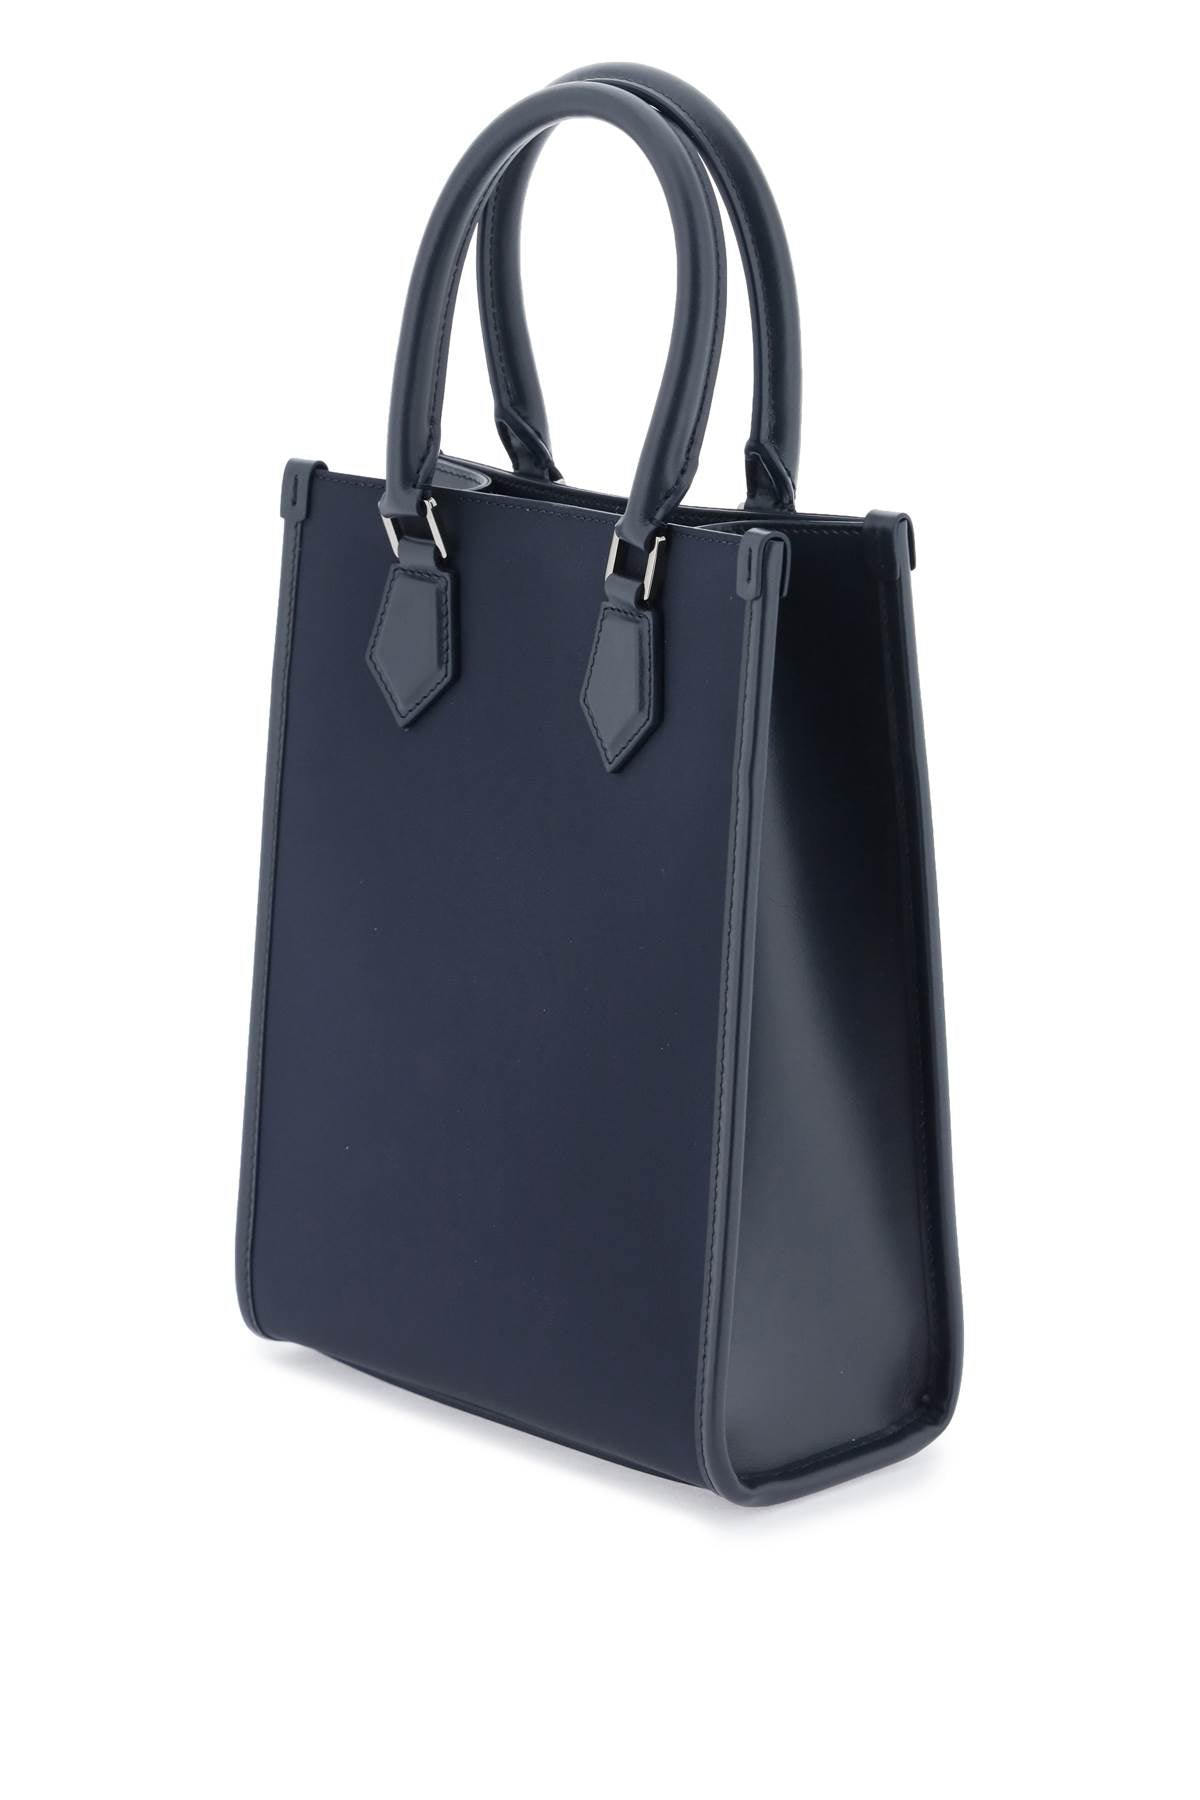 DOLCE & GABBANA Navy Small Nylon and Leather Trim Tote Bag with Rubberized Logo for Men